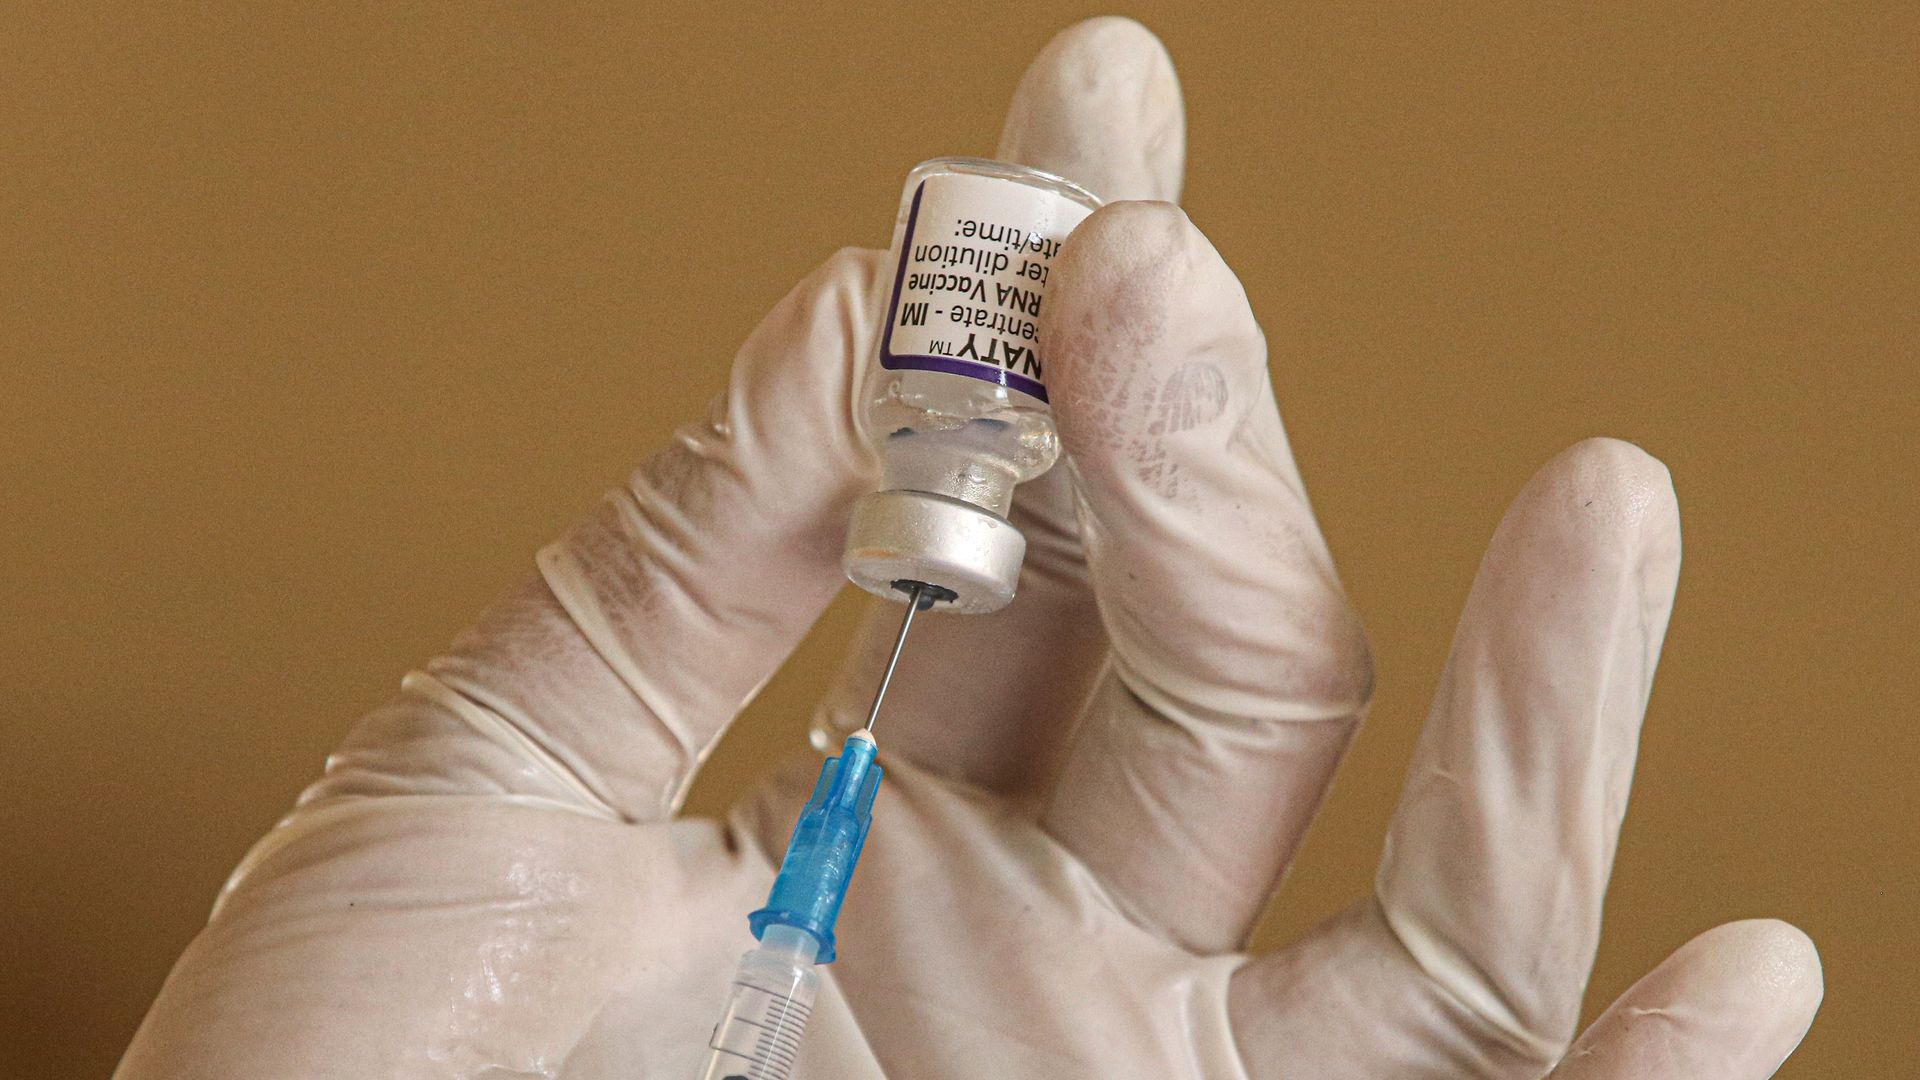 Someone wearing gloves fills up a vaccine syringe